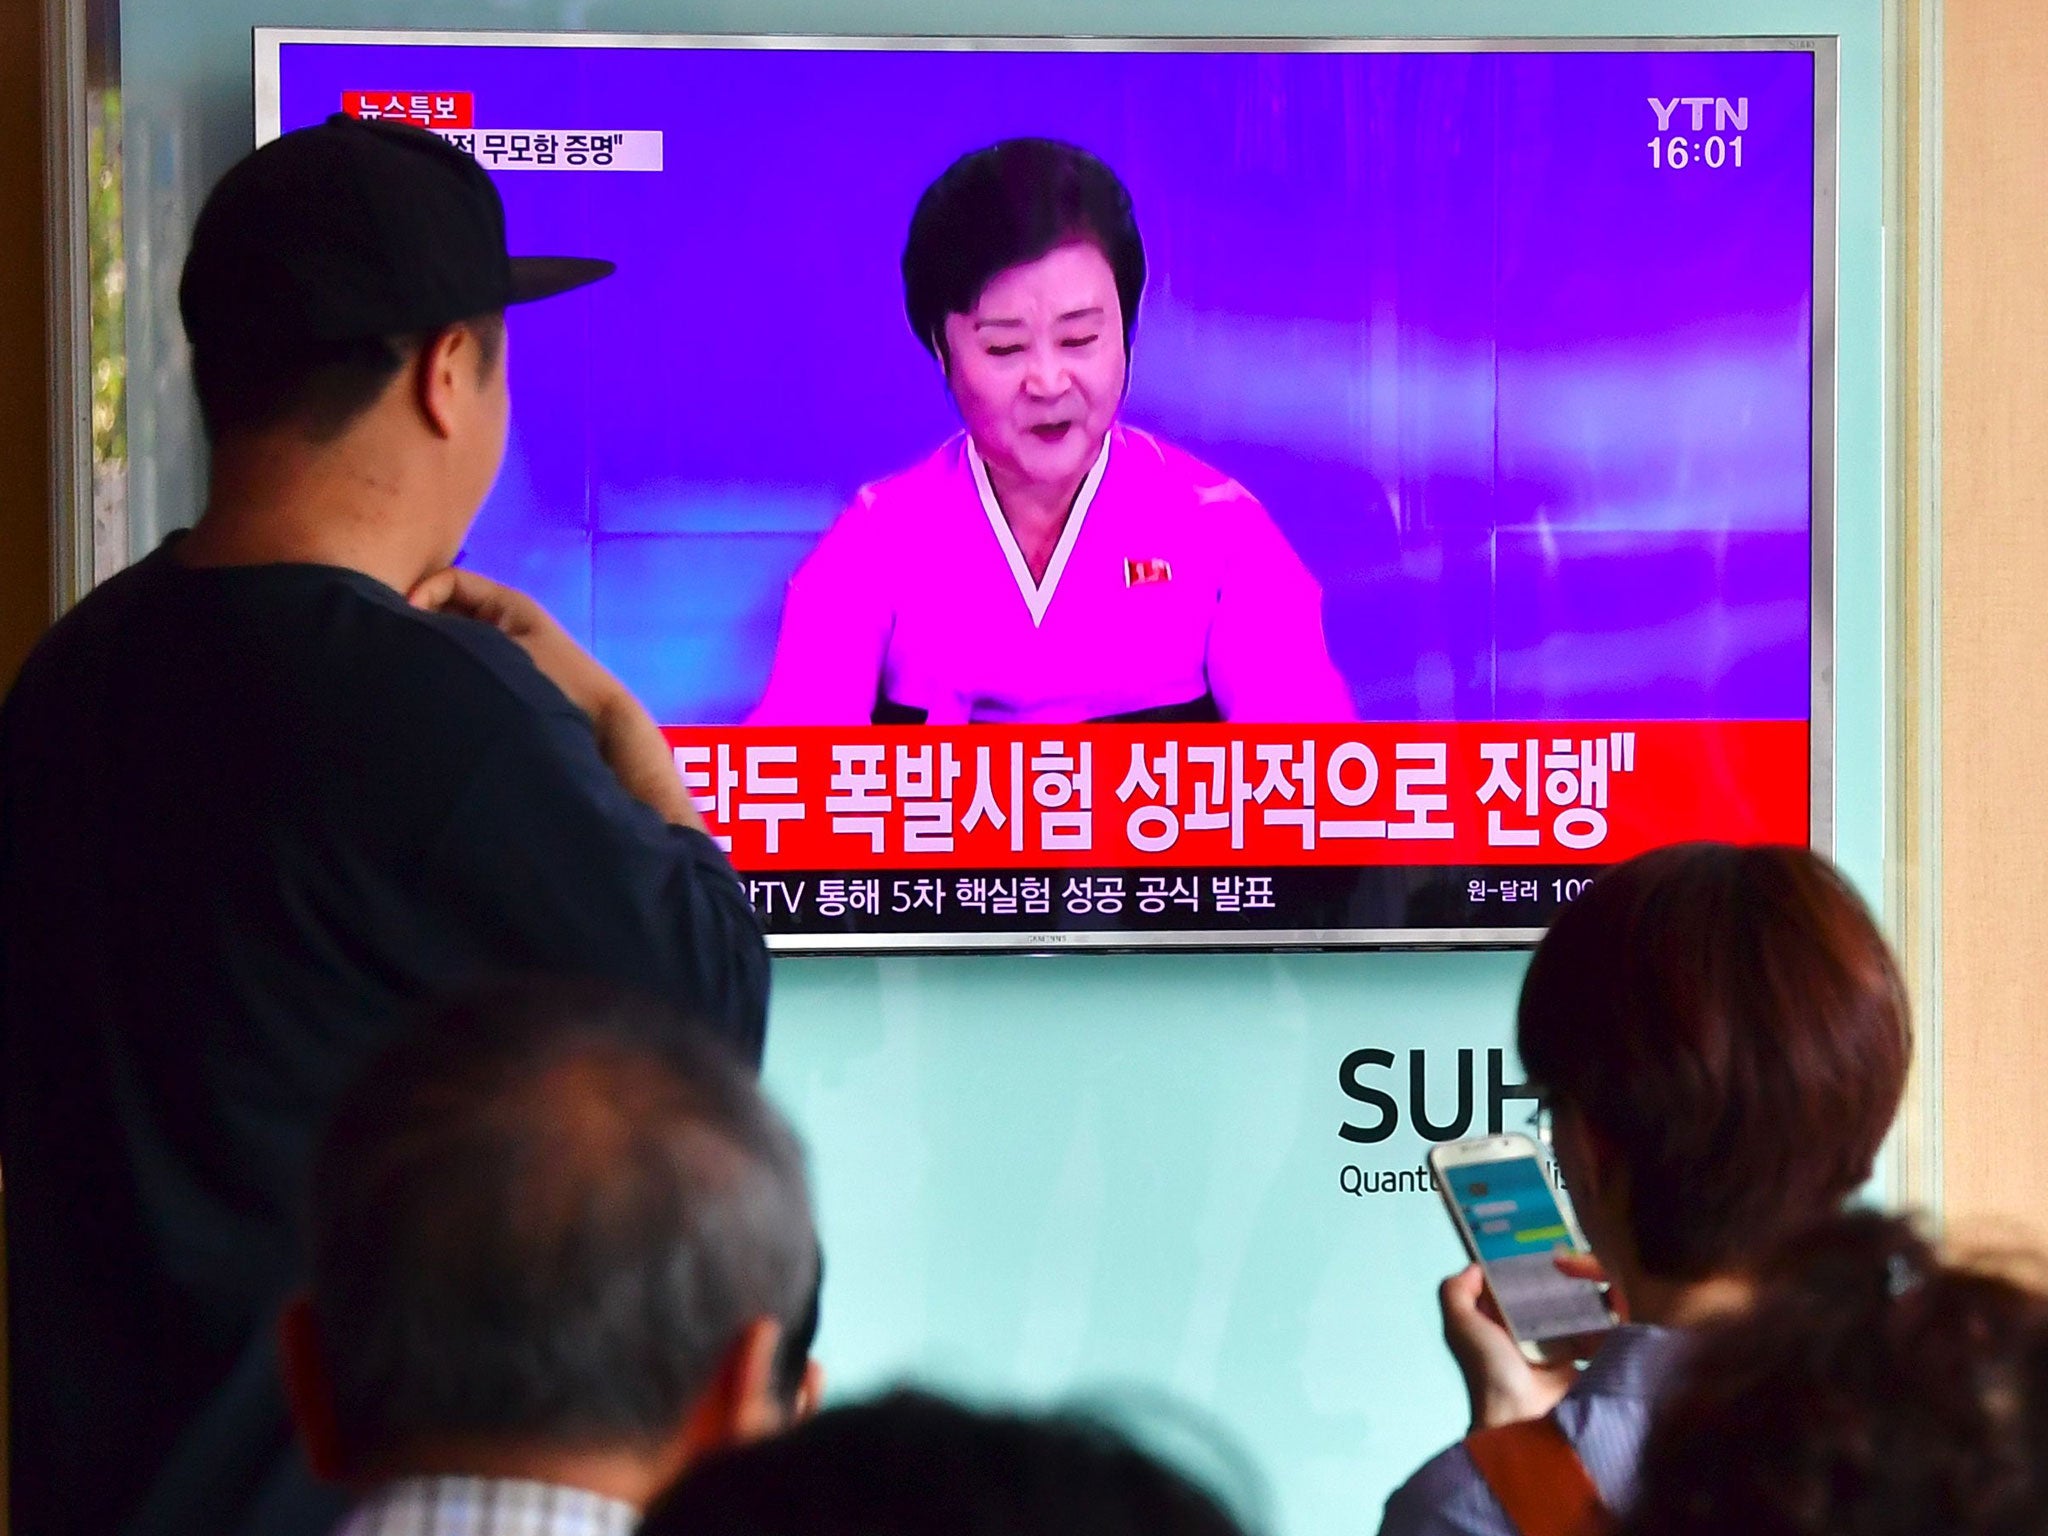 A North Korean nuclear test broadcast on state TV